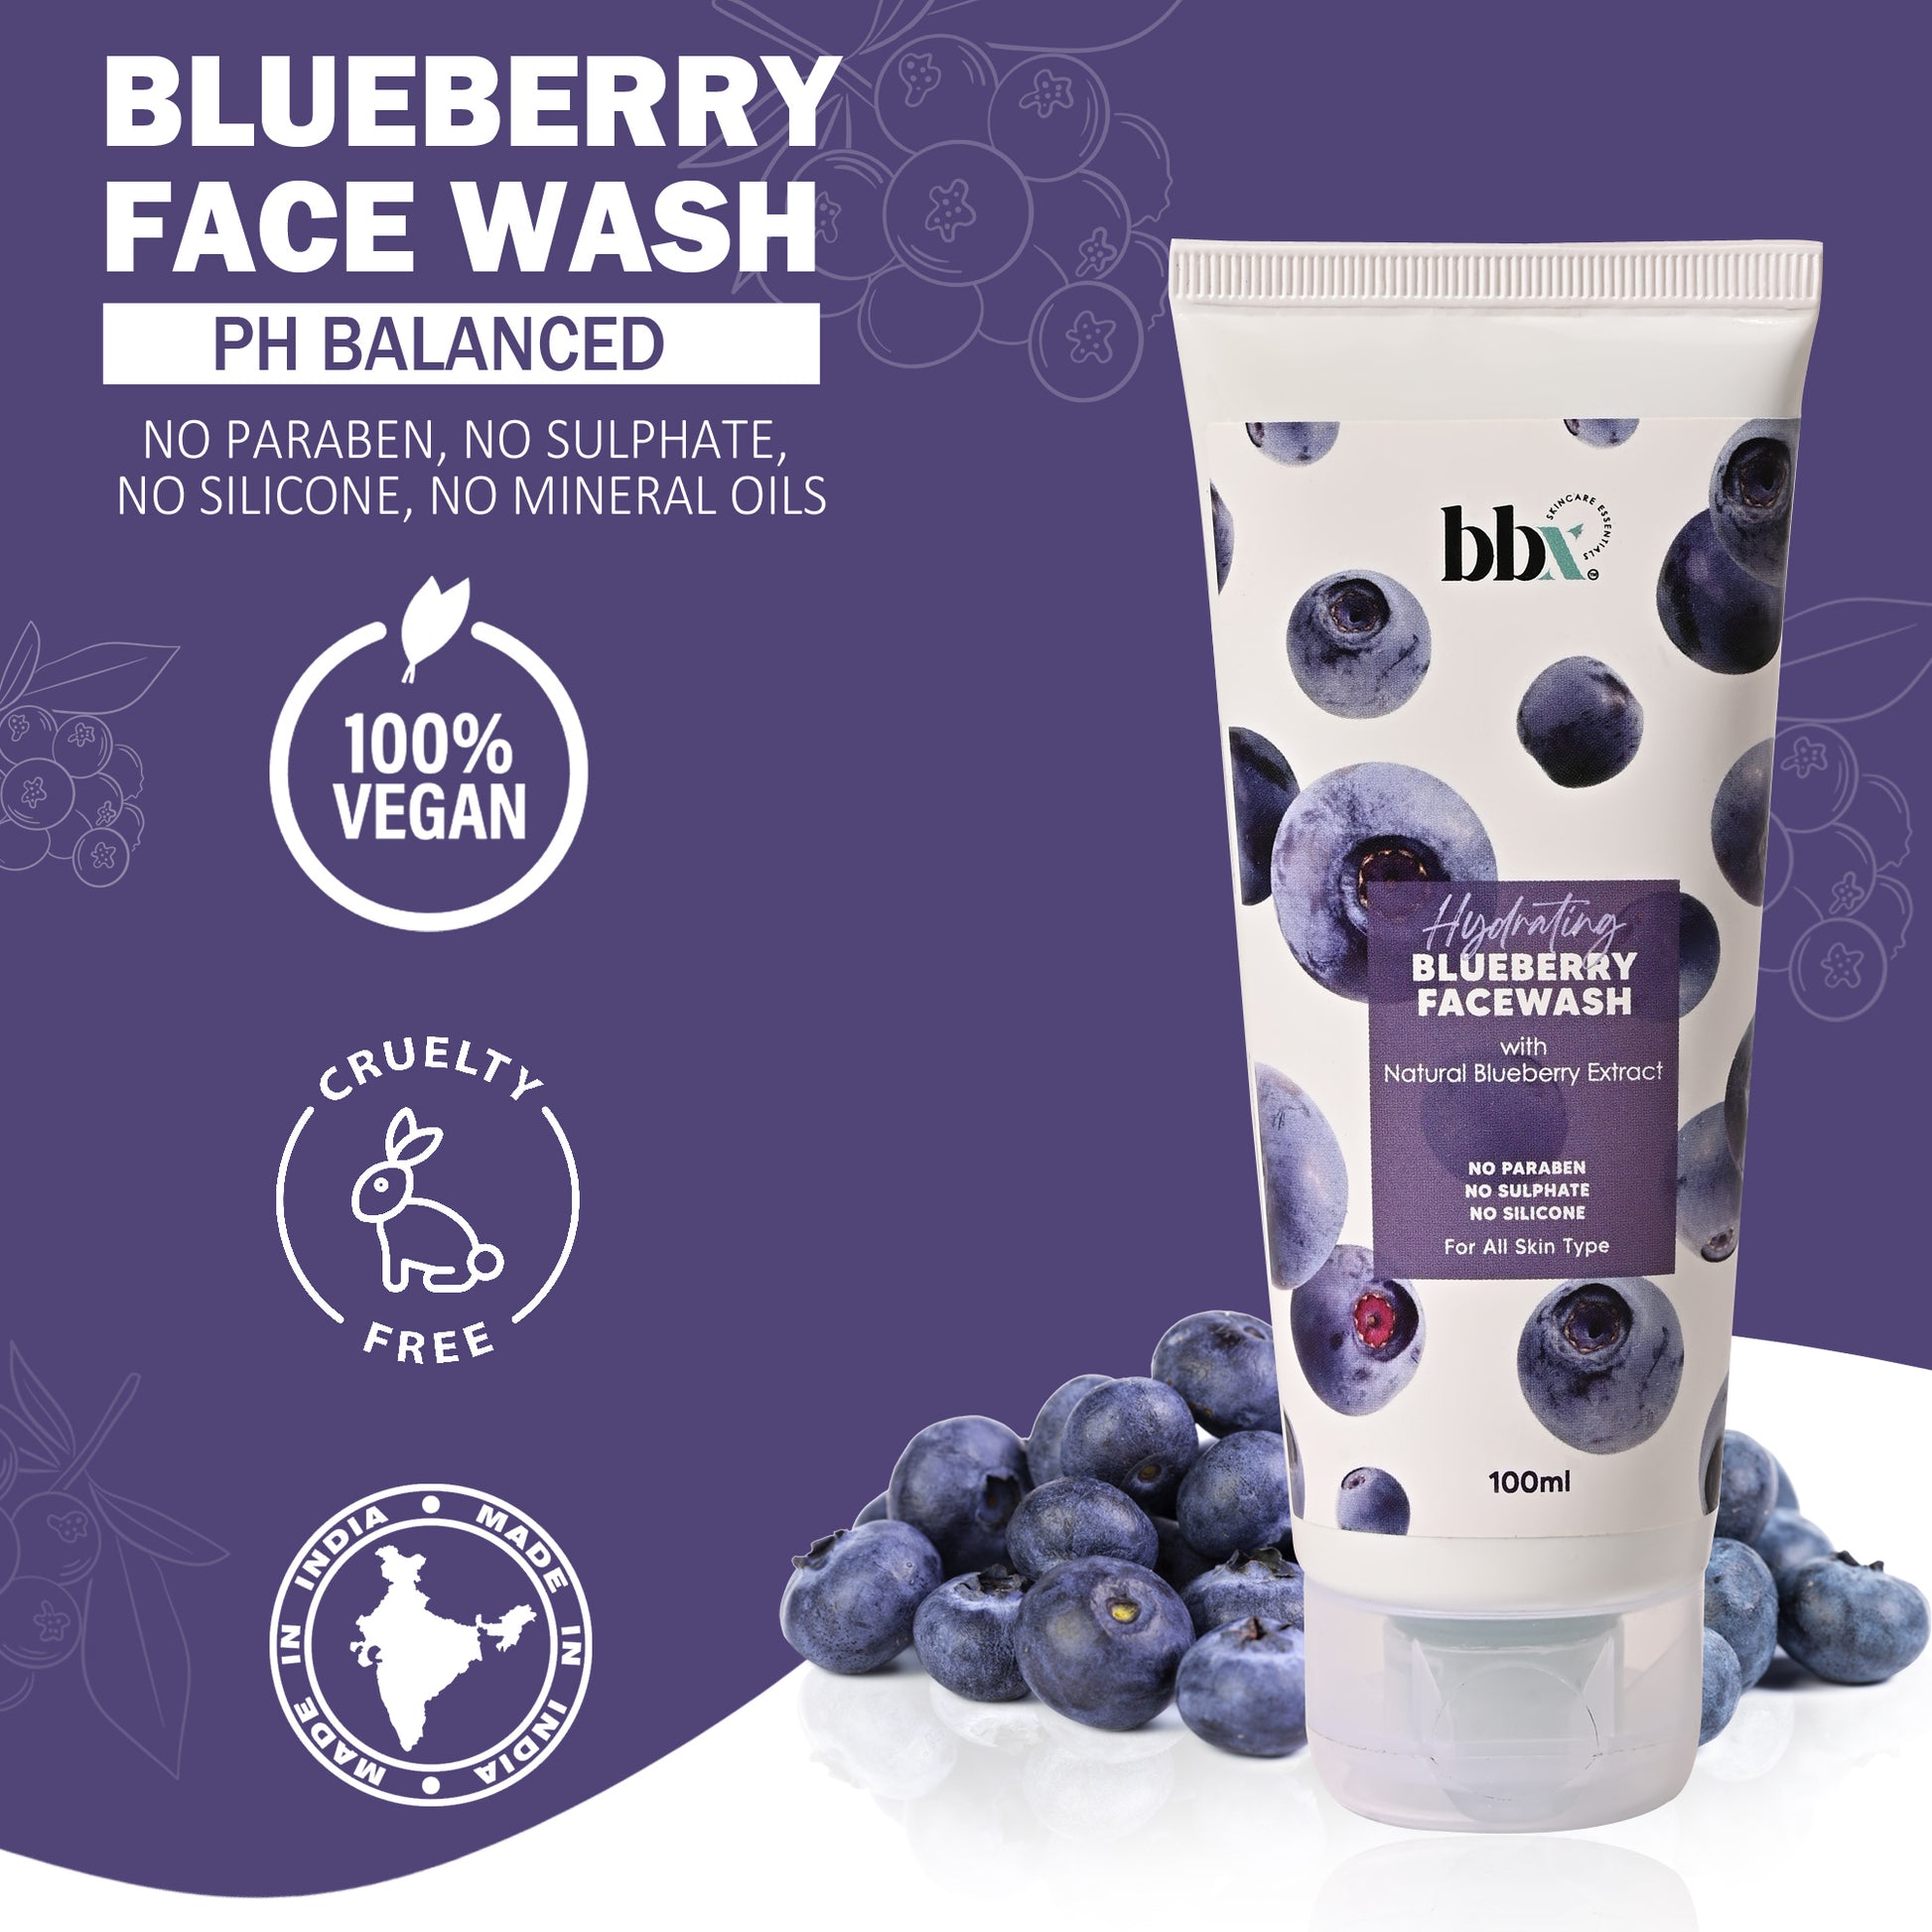 BBX Skincare Blueberry Extract Facewash for Oil Control and Dry Skin